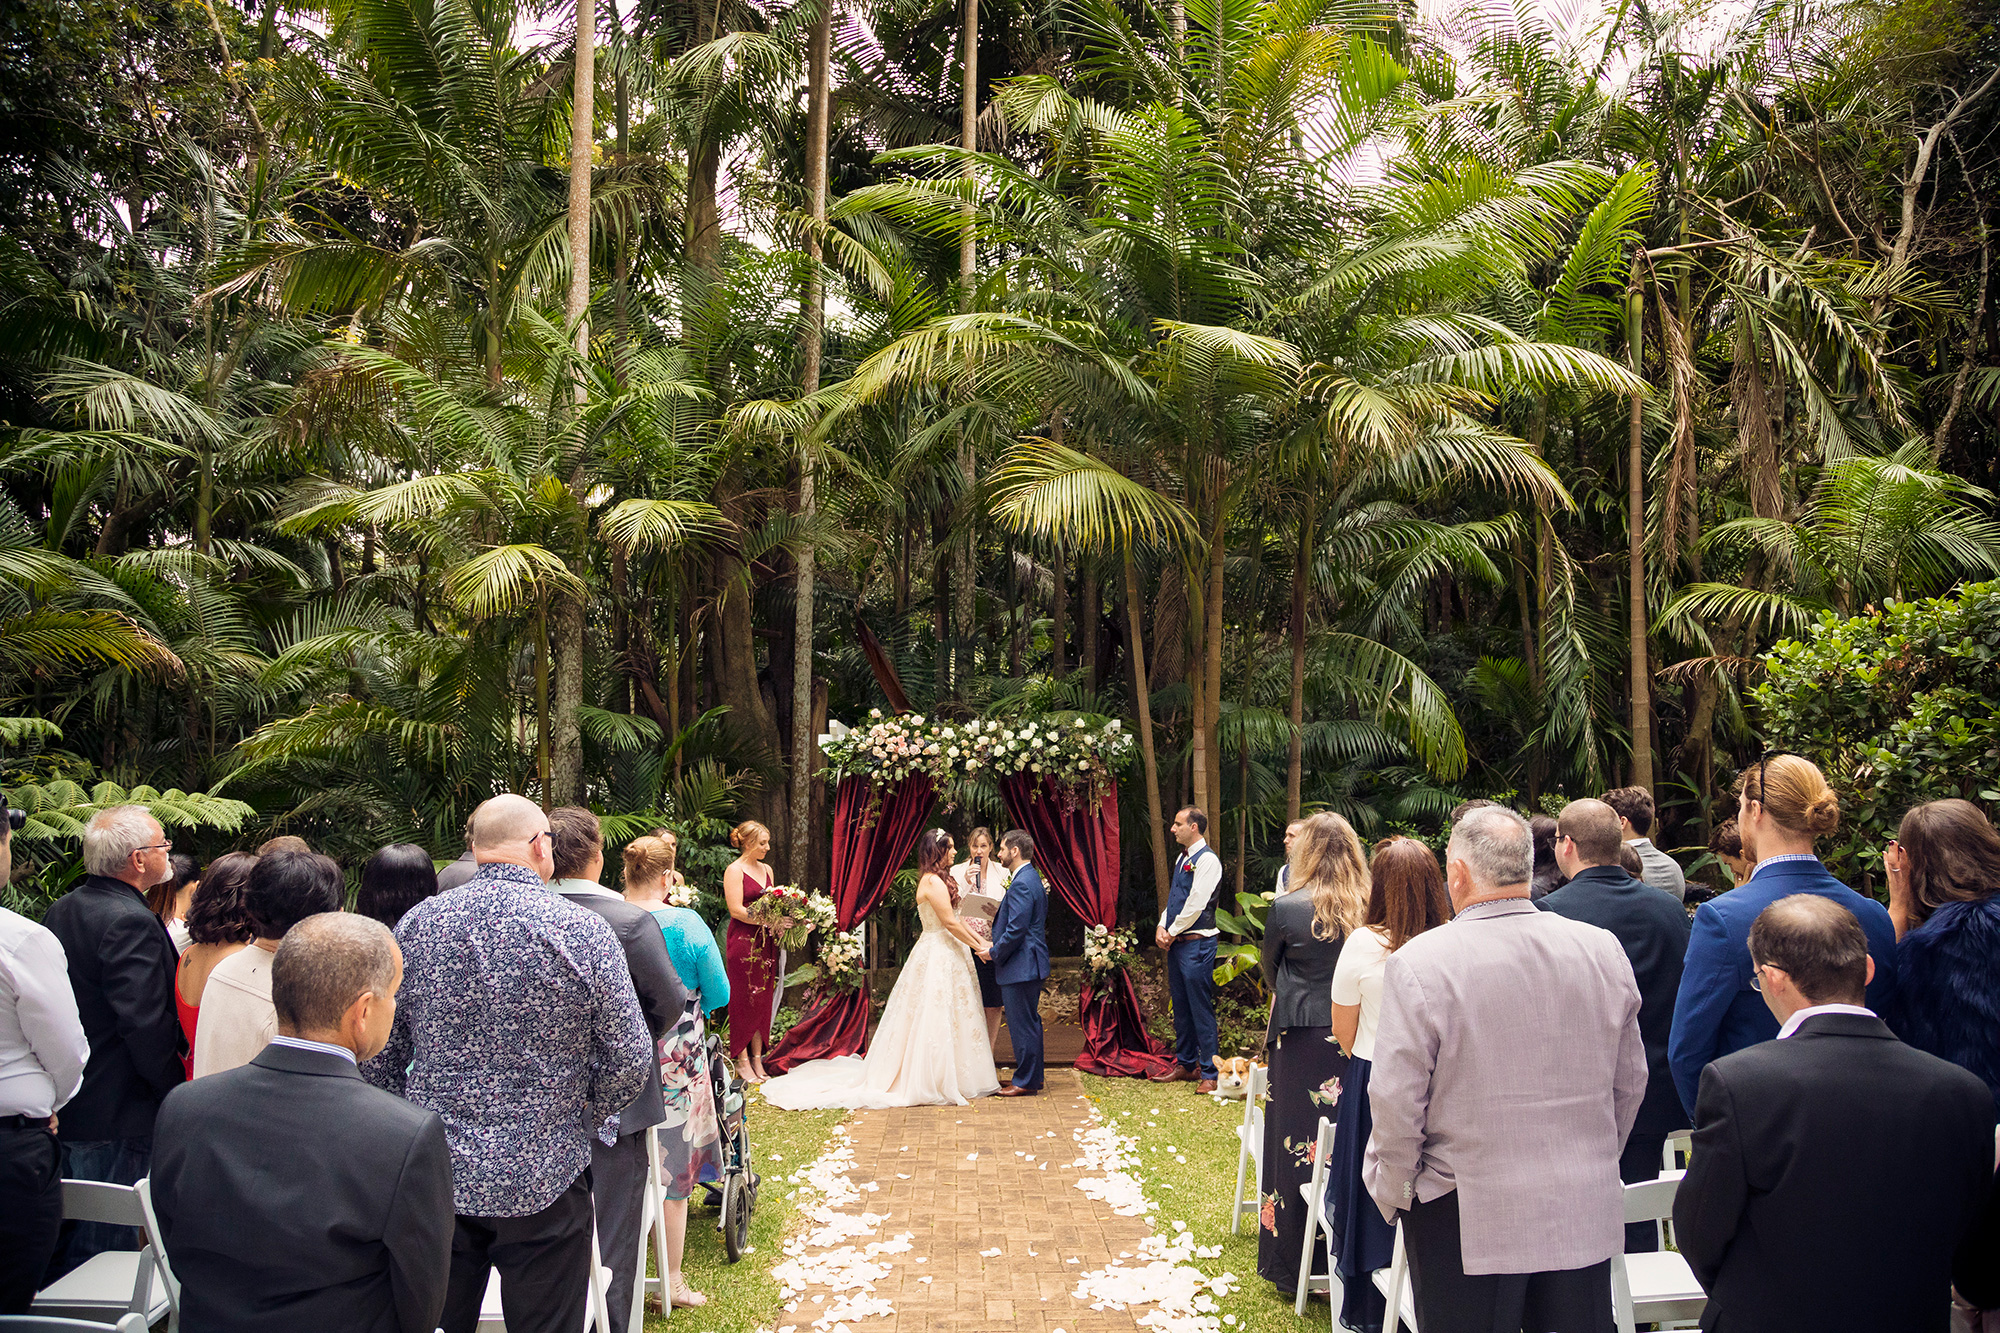 Chemere_Matthew_Enchanted-Forest-Wedding_DK-Photography_031